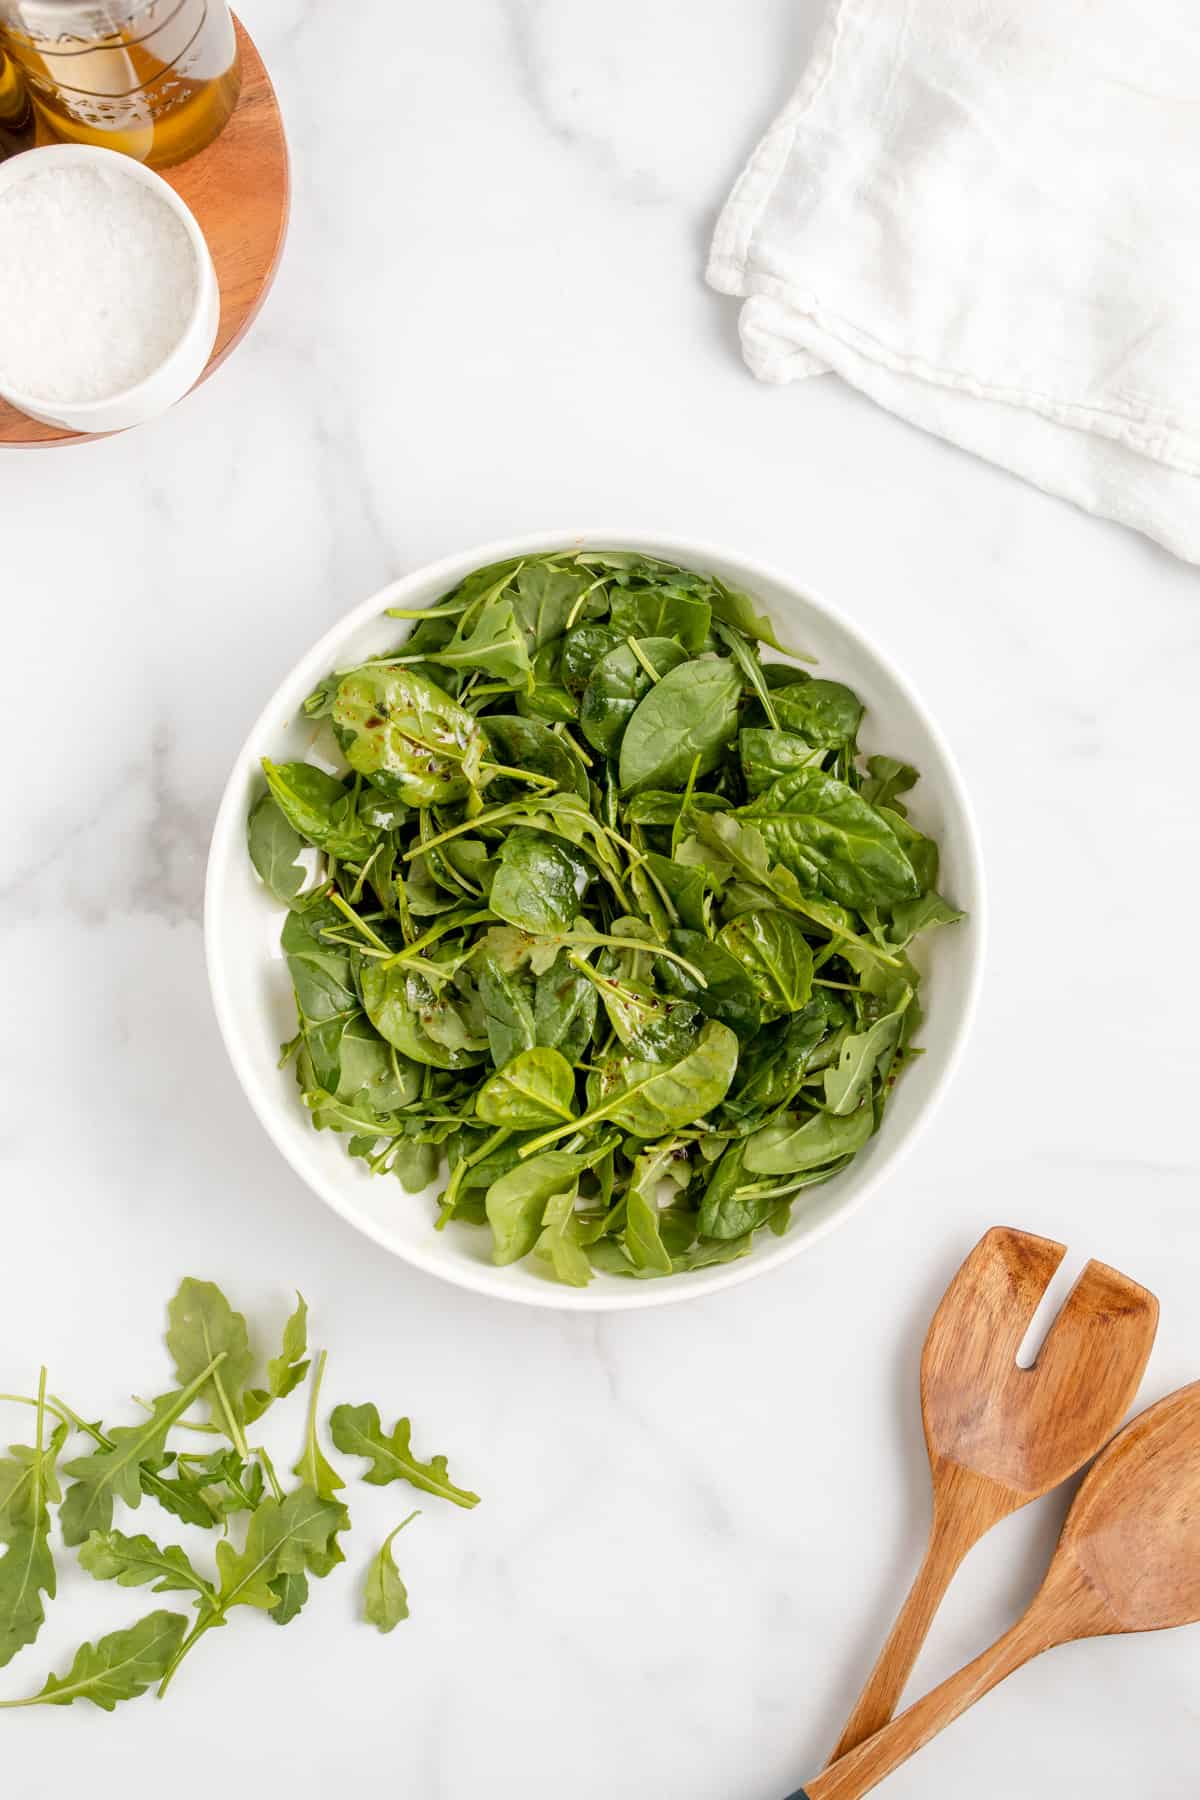 Spinach and arugula salad with balsamic vinaigrette in a white serving bowl.